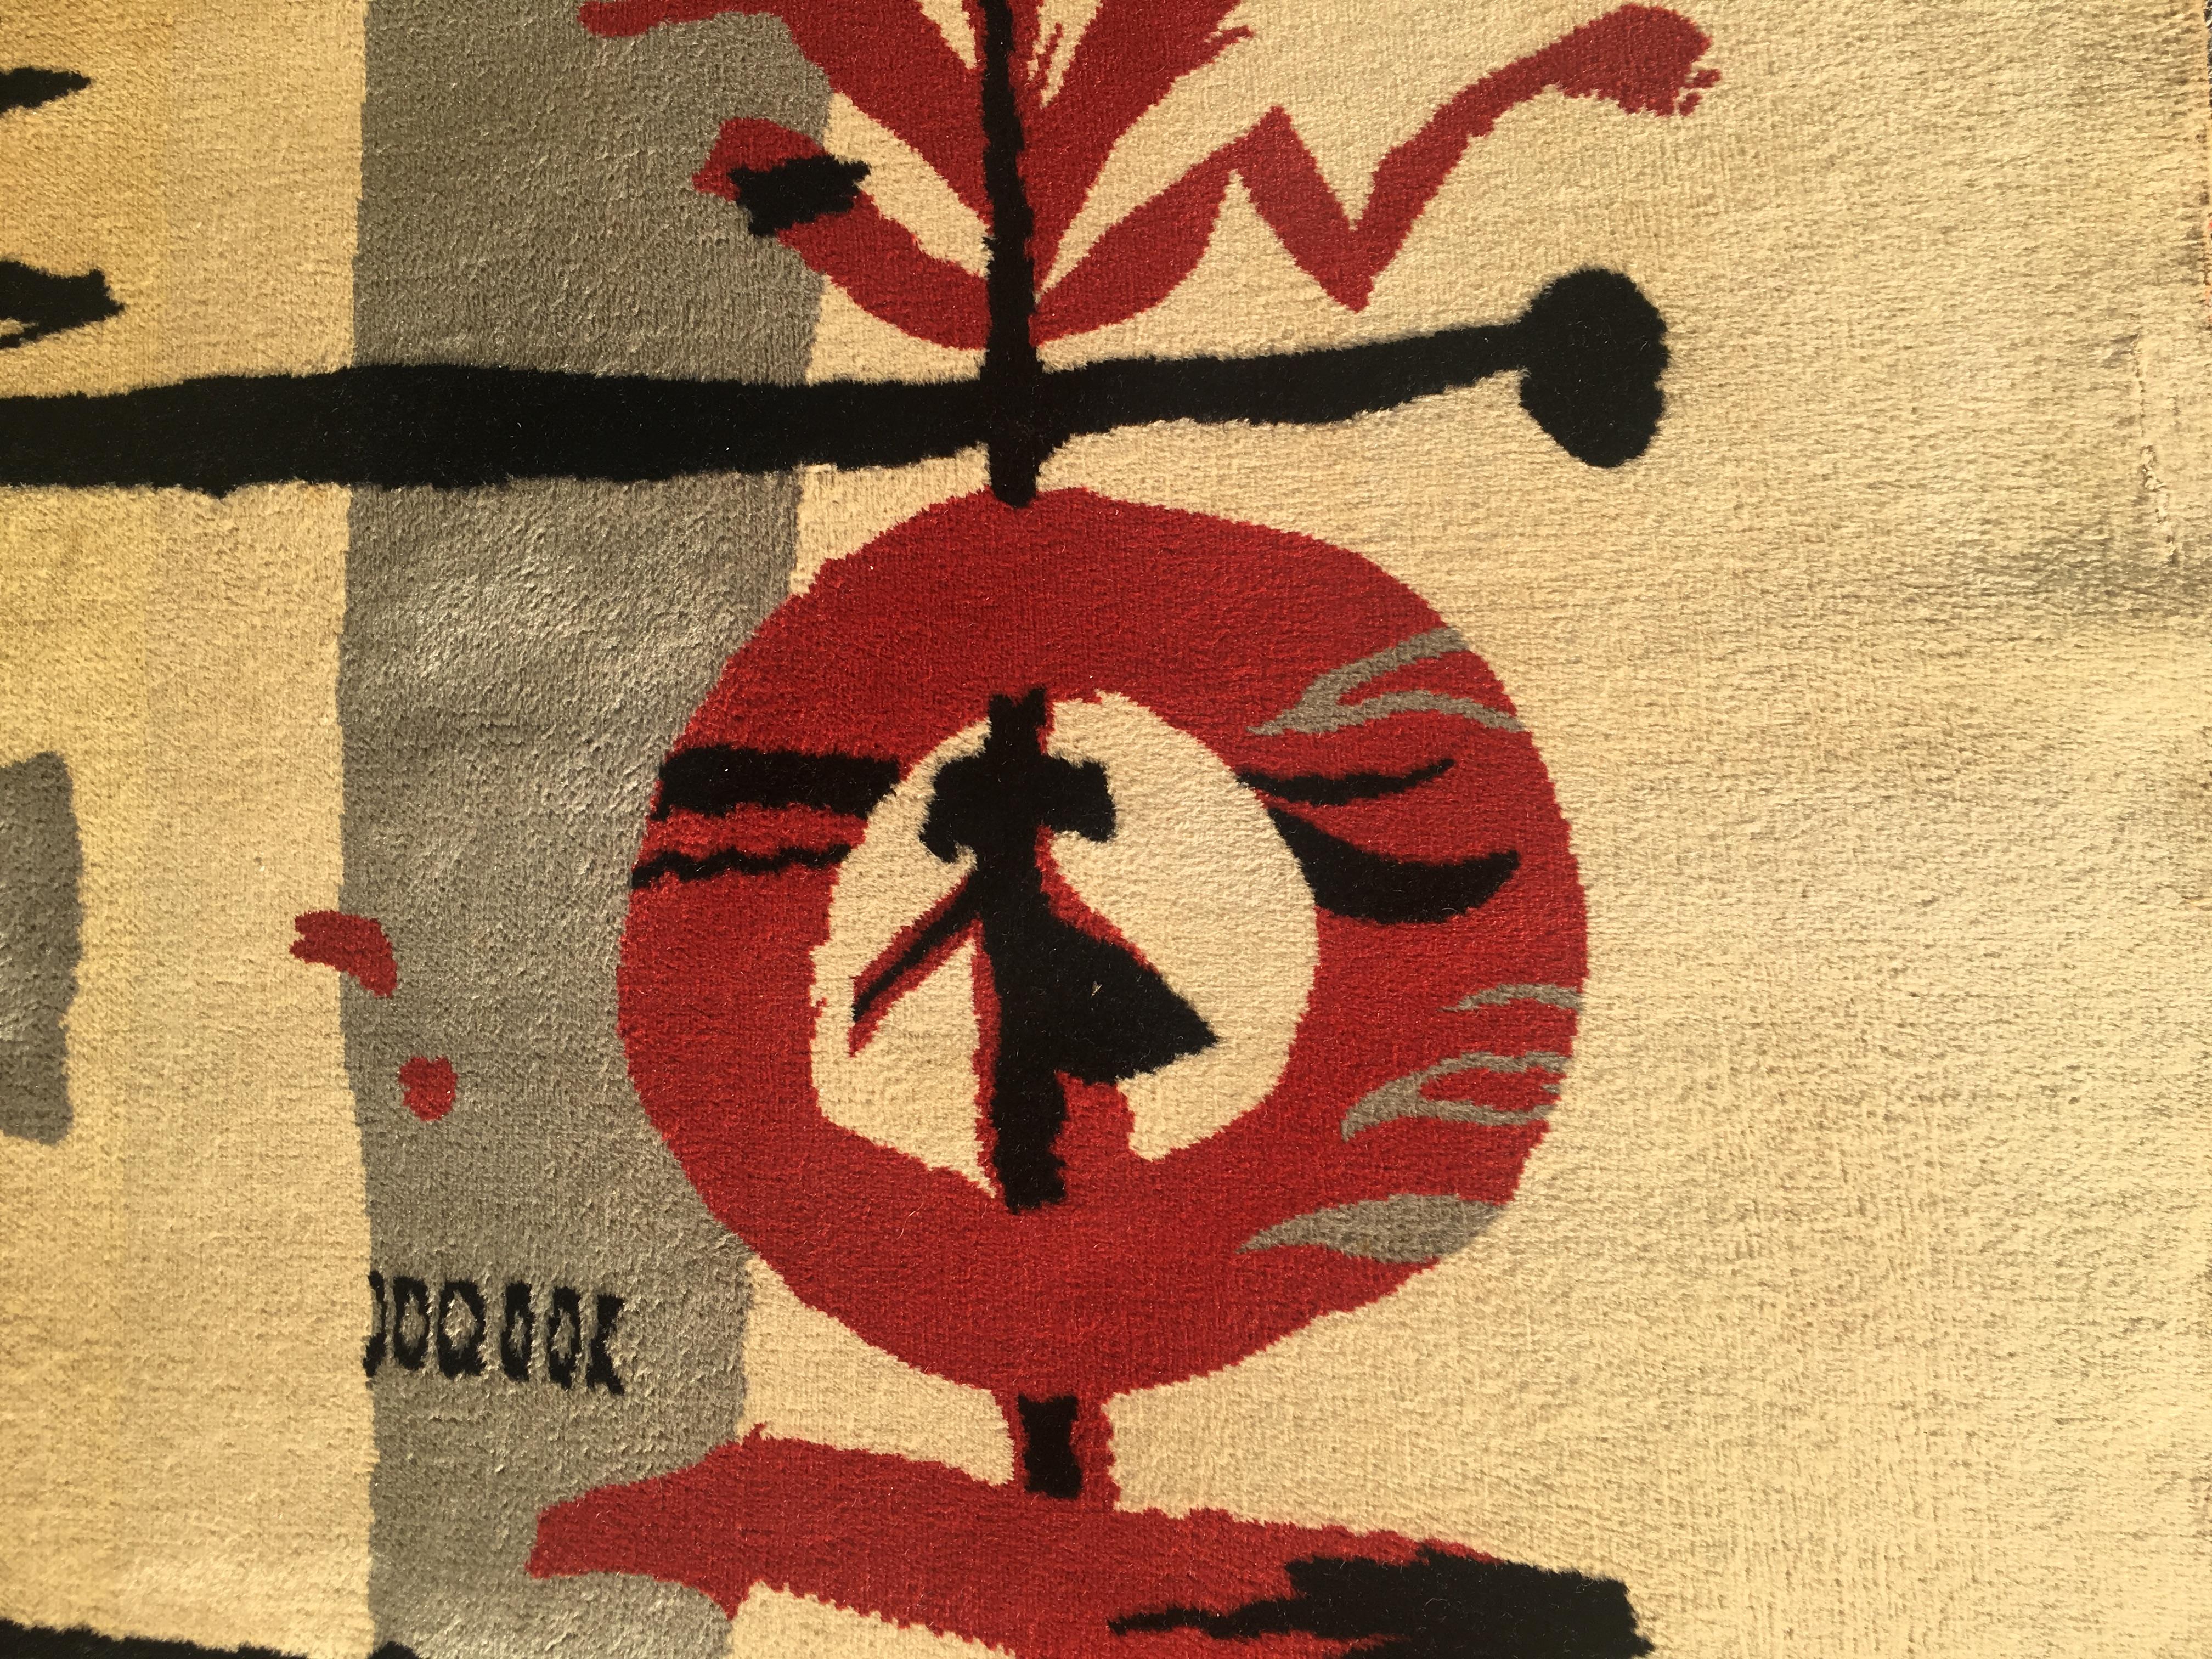 Fabulous midcentury rug or tapestry by Marc Saint Saens (1903-1973) signed, circa 1960 with matching original stencil (pochoir). 

Marc Saint Saens was a Frenchman known as an influential expressionist painter as well as a major artist in the